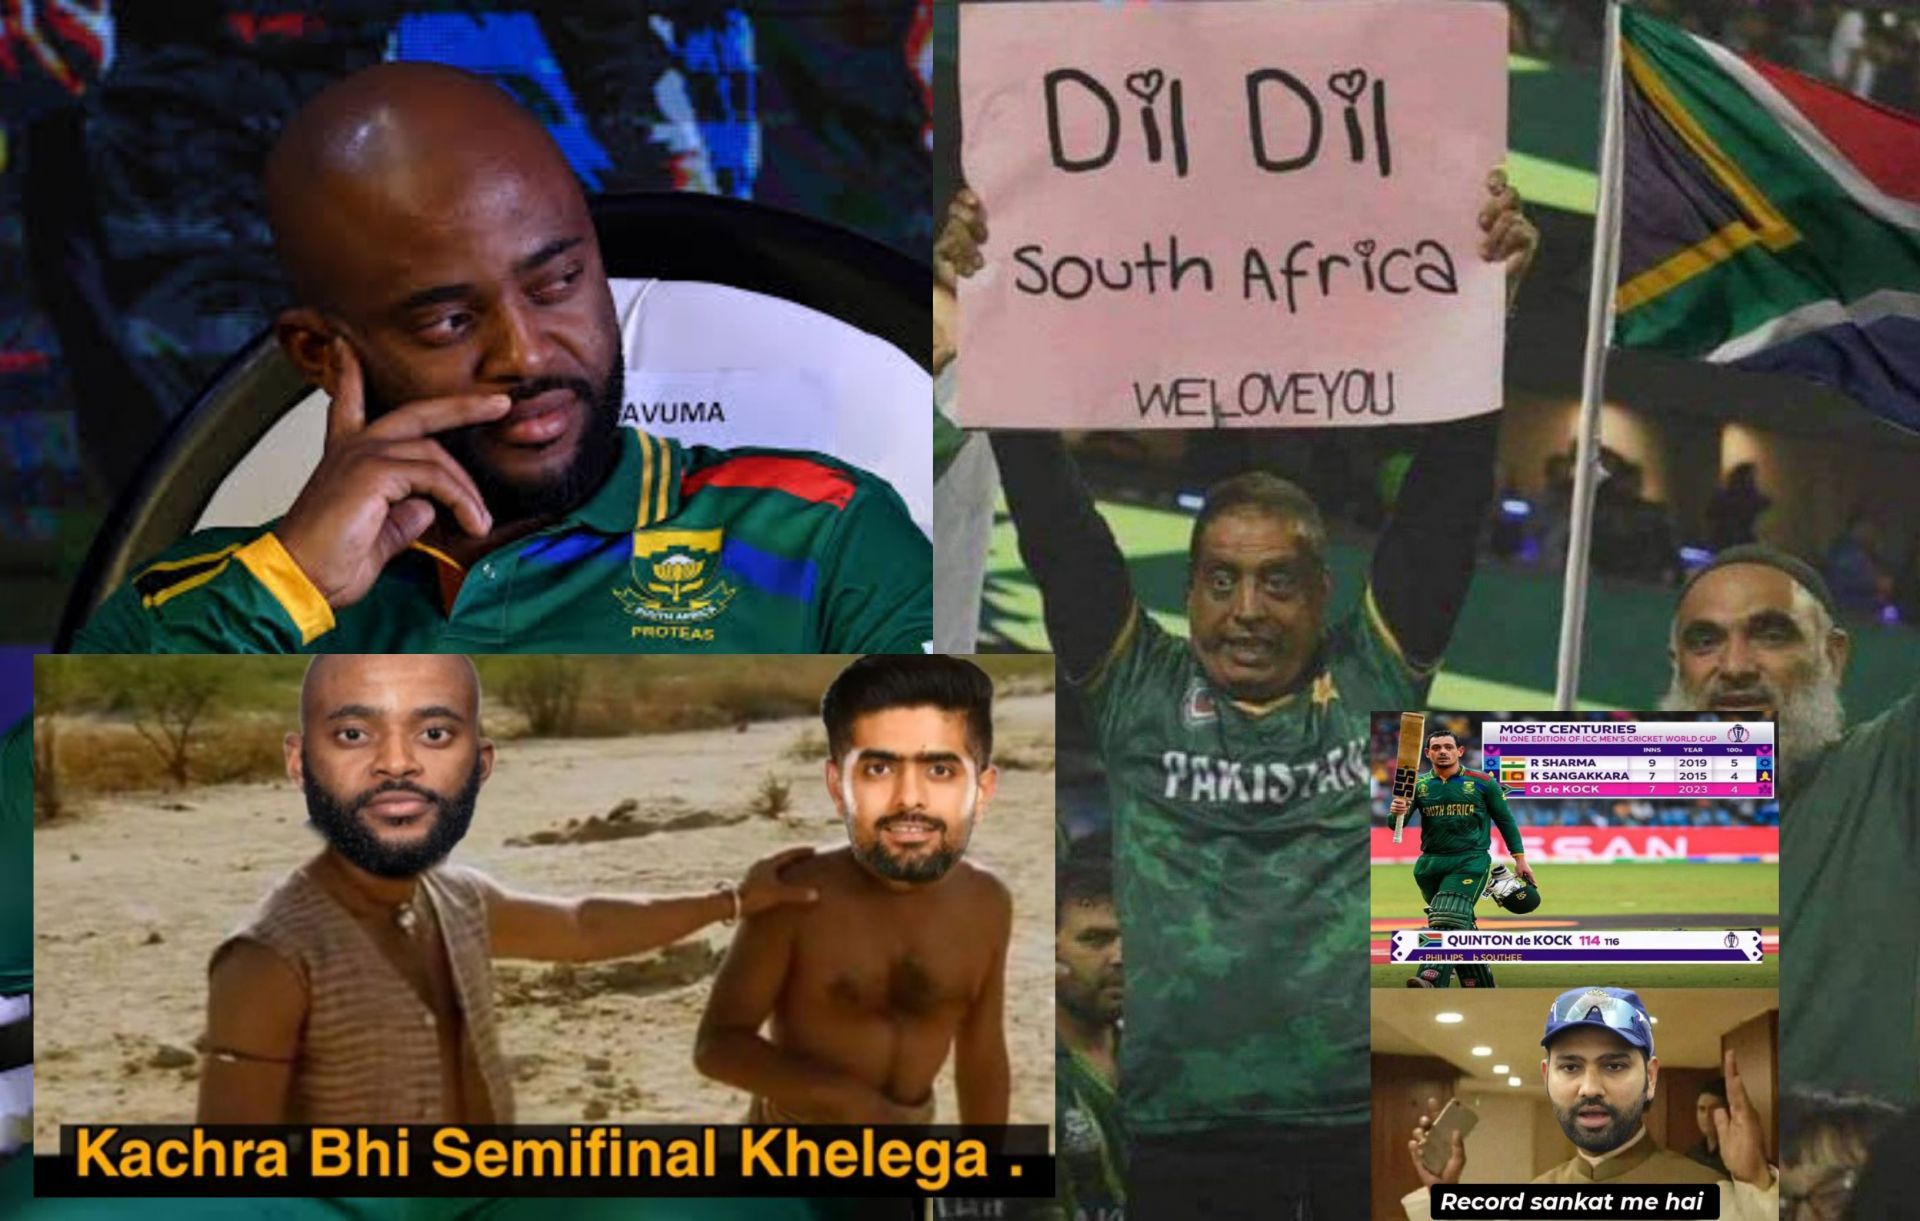 Top 10 funny memes from the latest match in World Cup. 